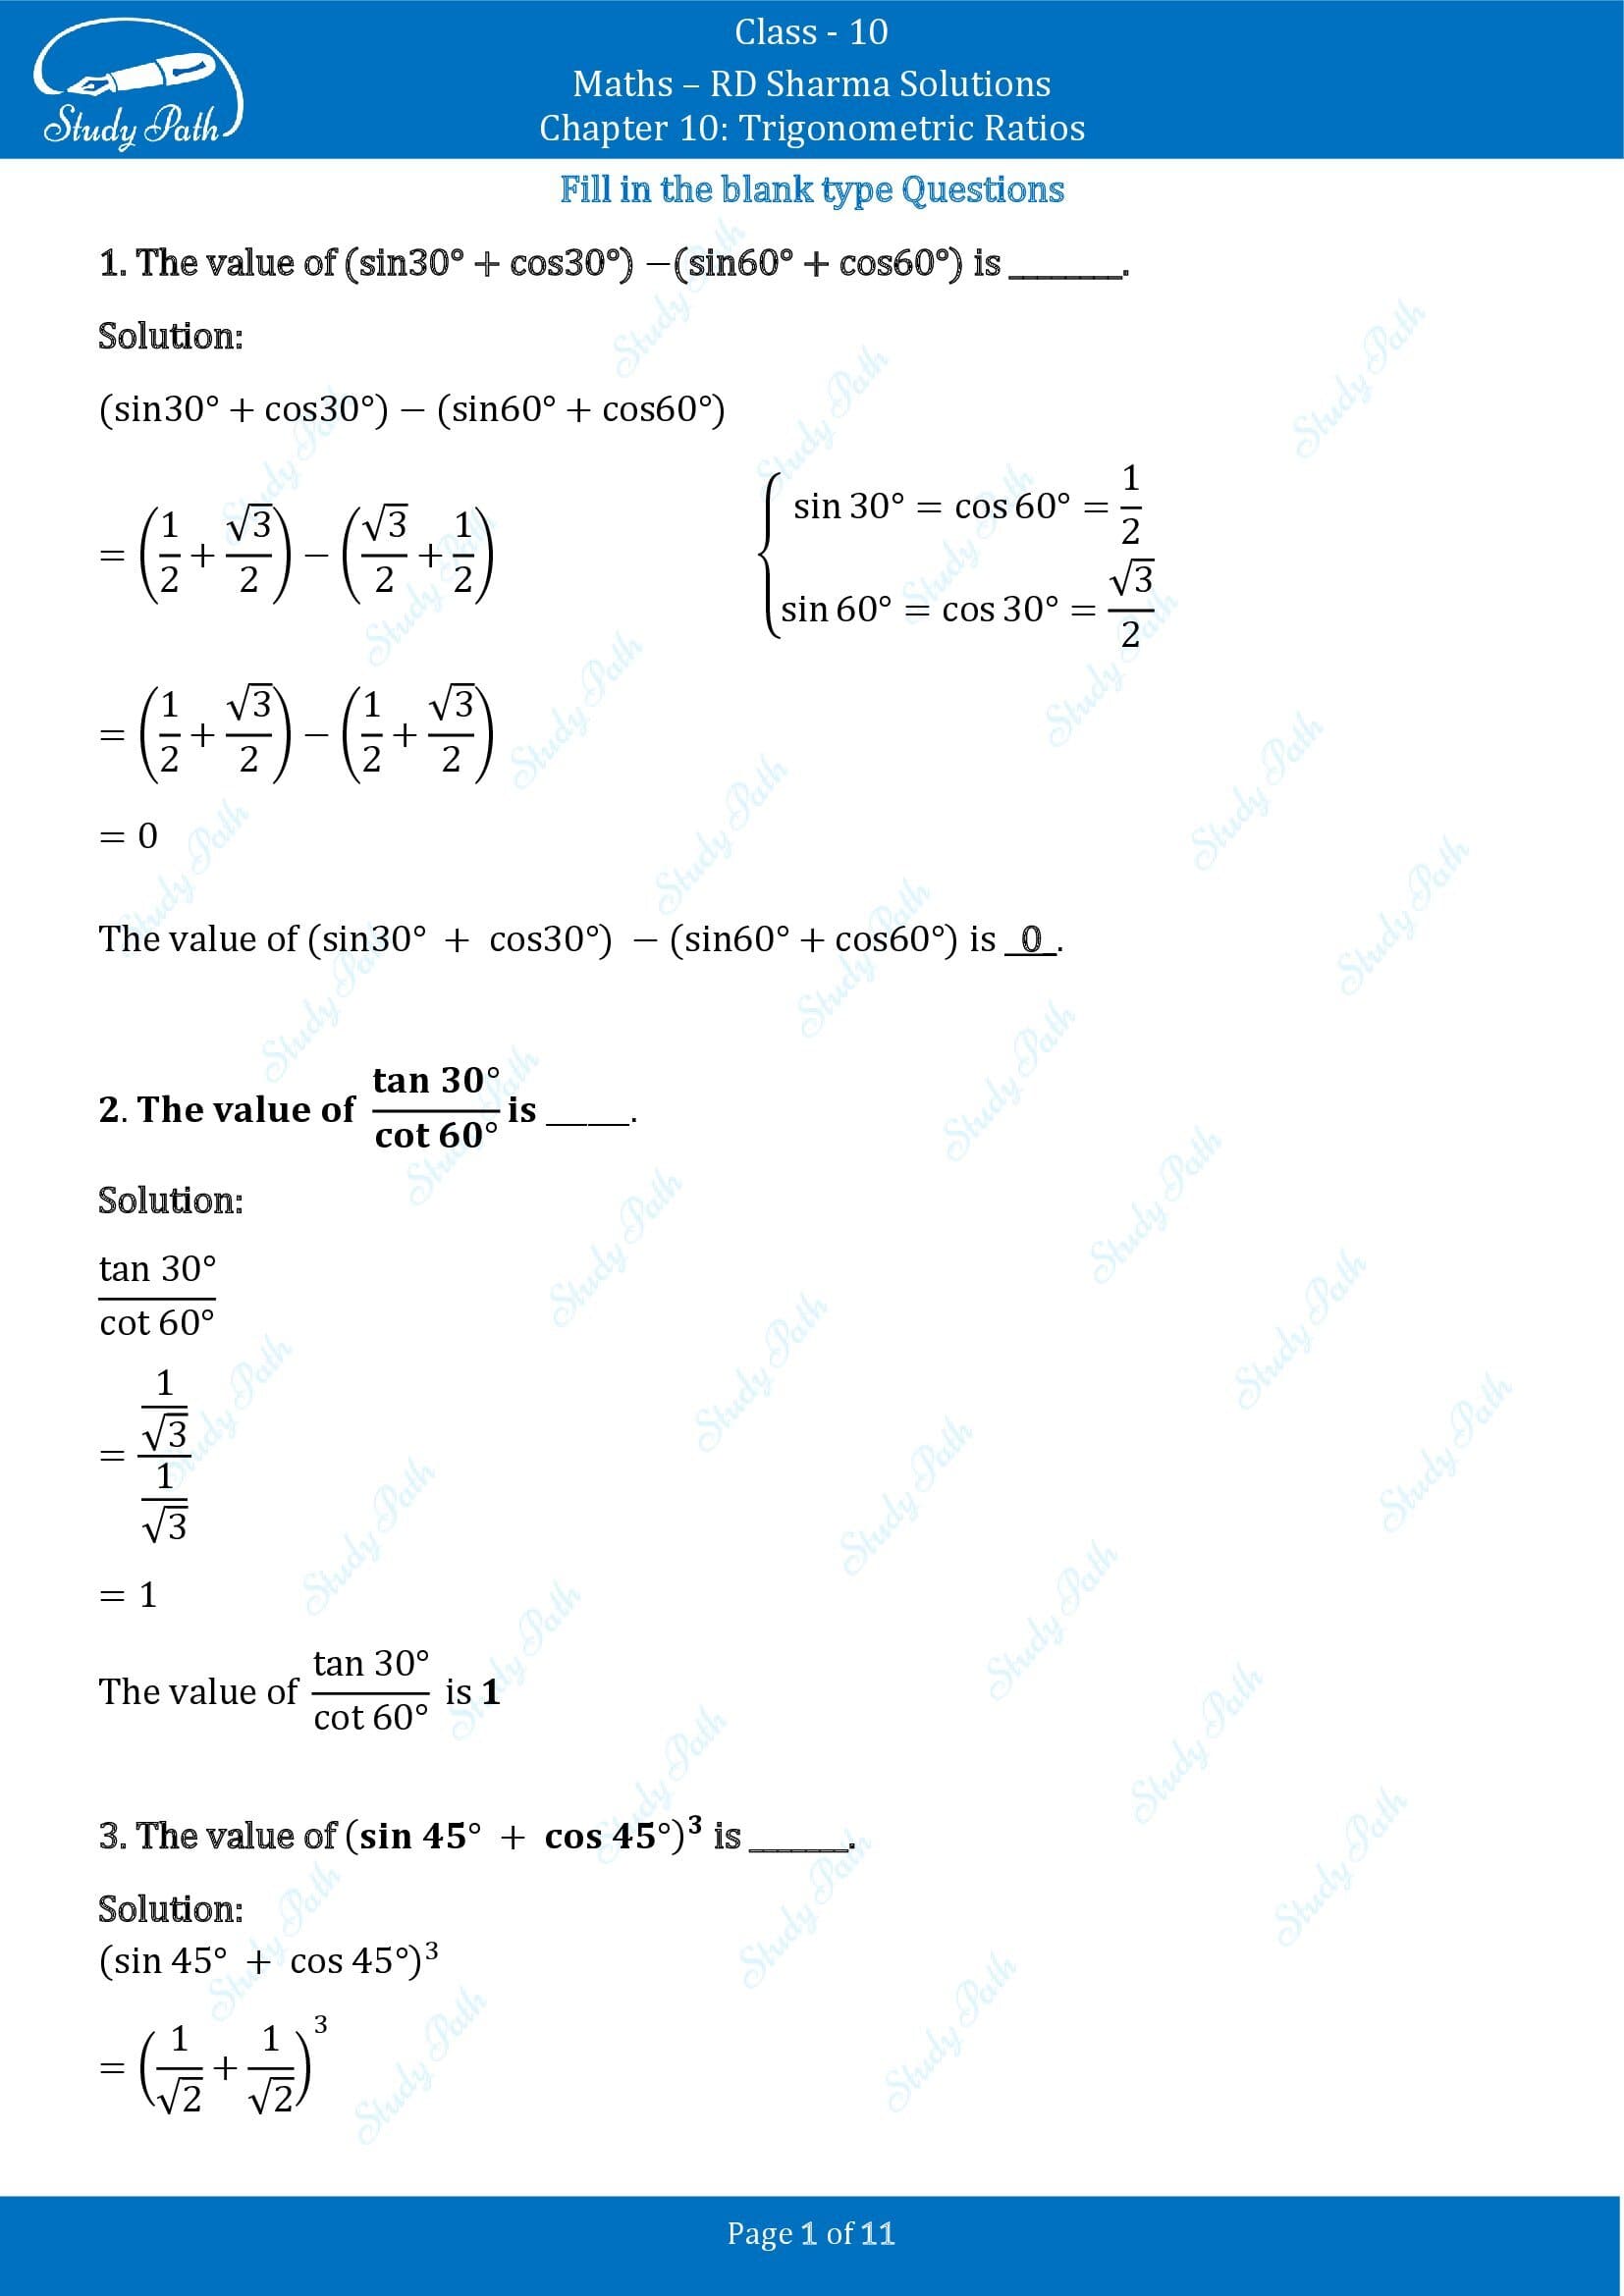 RD Sharma Solutions Class 10 Chapter 10 Trigonometric Ratios Fill in the Blank Type Questions FBQs 00001